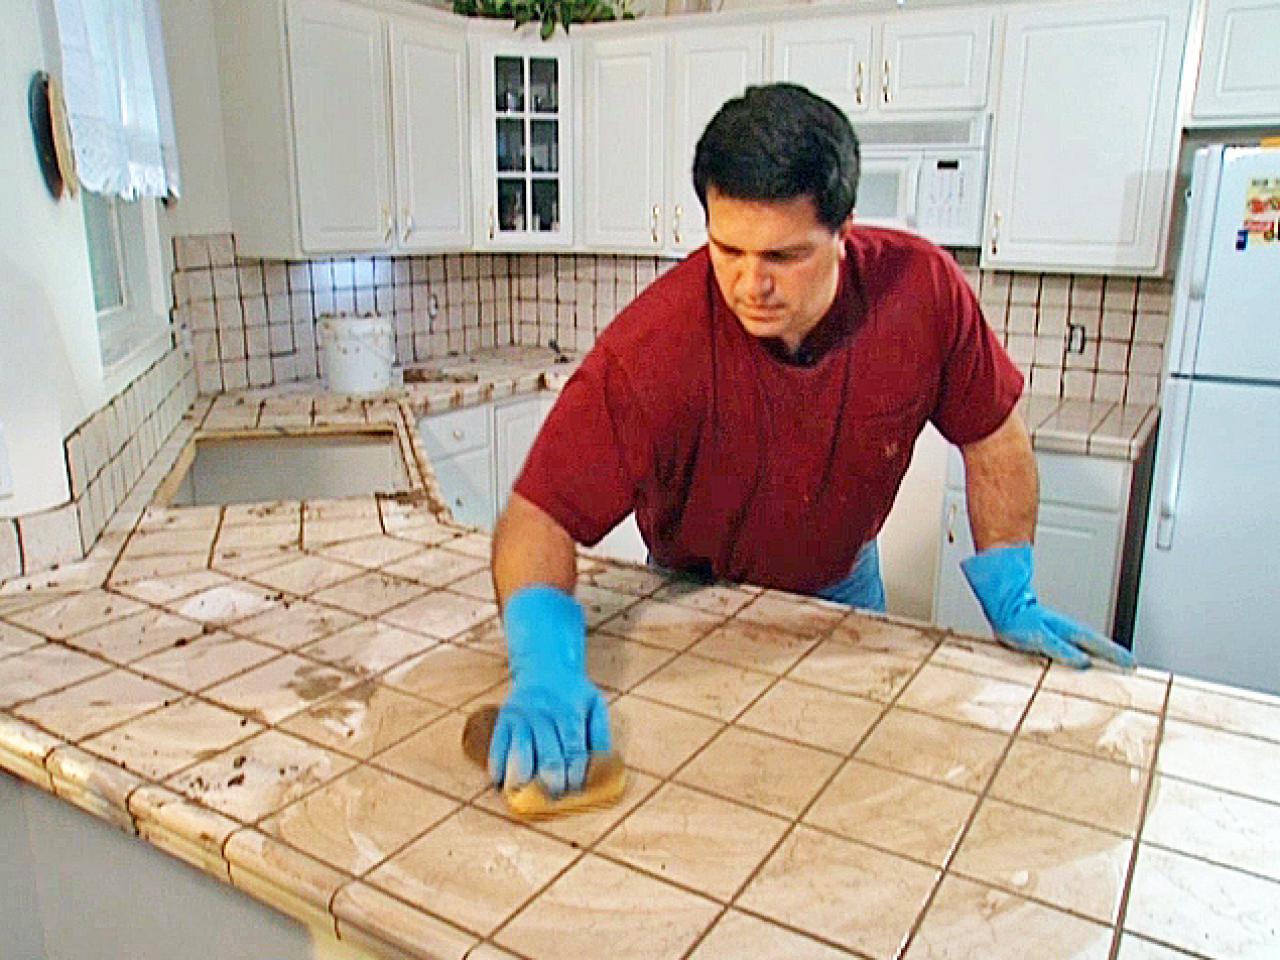 Install Tile Over Laminate Countertop, How To Cover Up A Tile Countertop